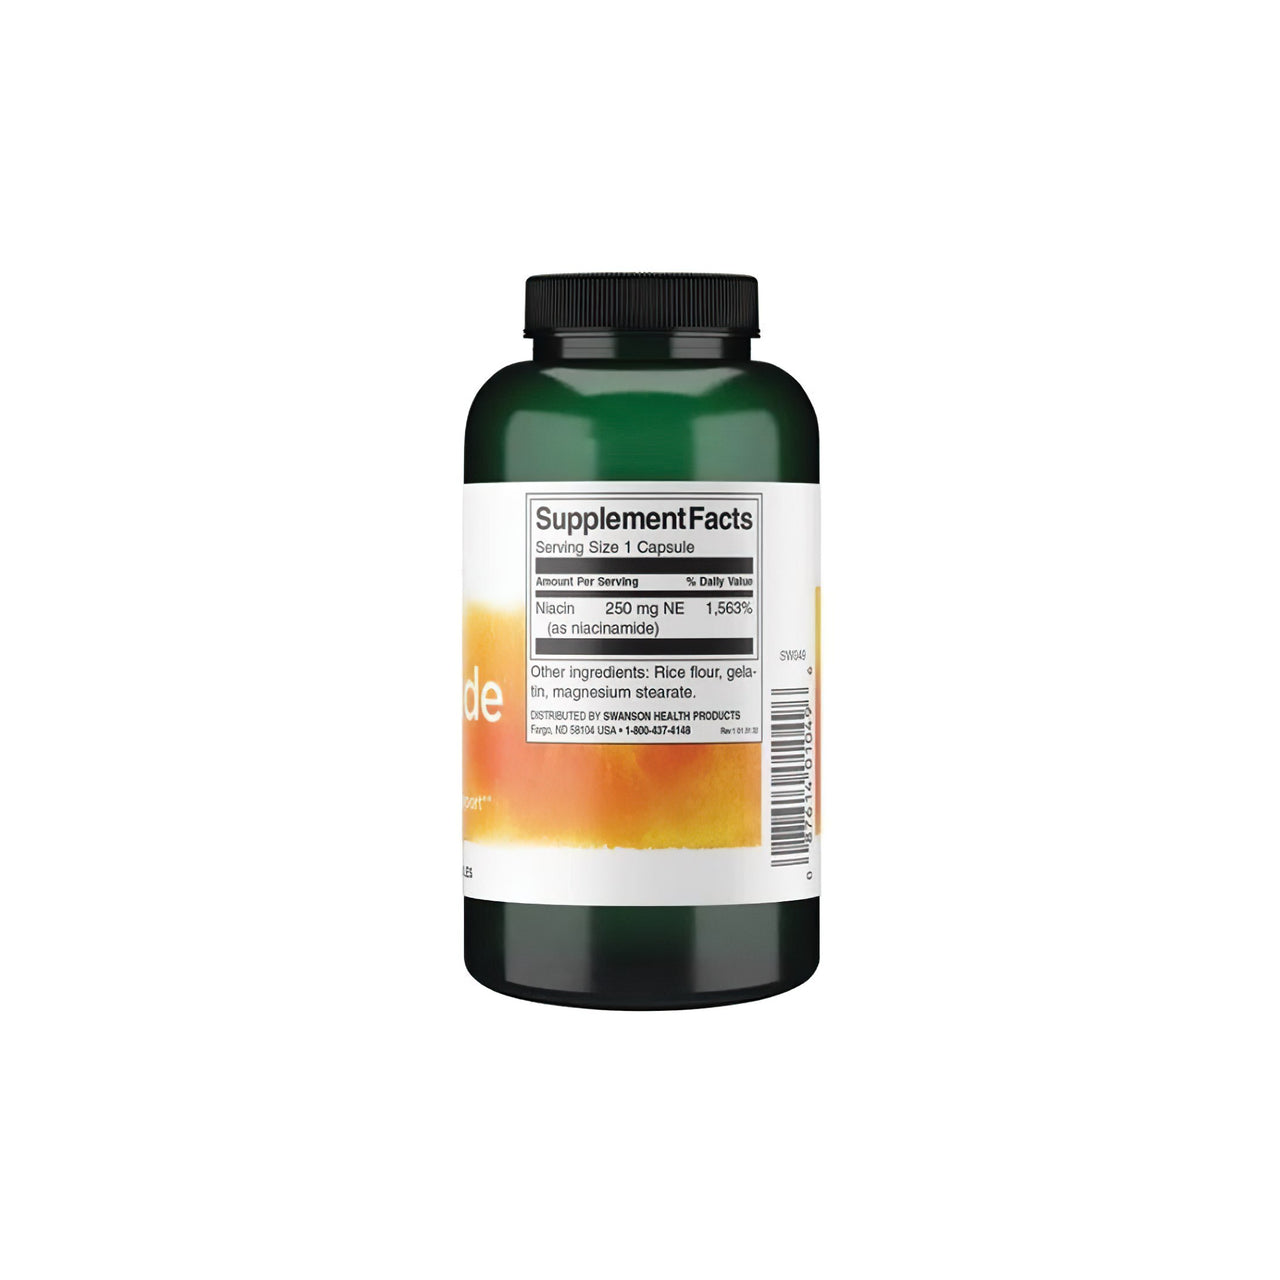 A bottle of Swanson's Vitamin B-3 Niacinamide - 250 mg 250 capsules, promoting joint health, on a white background.